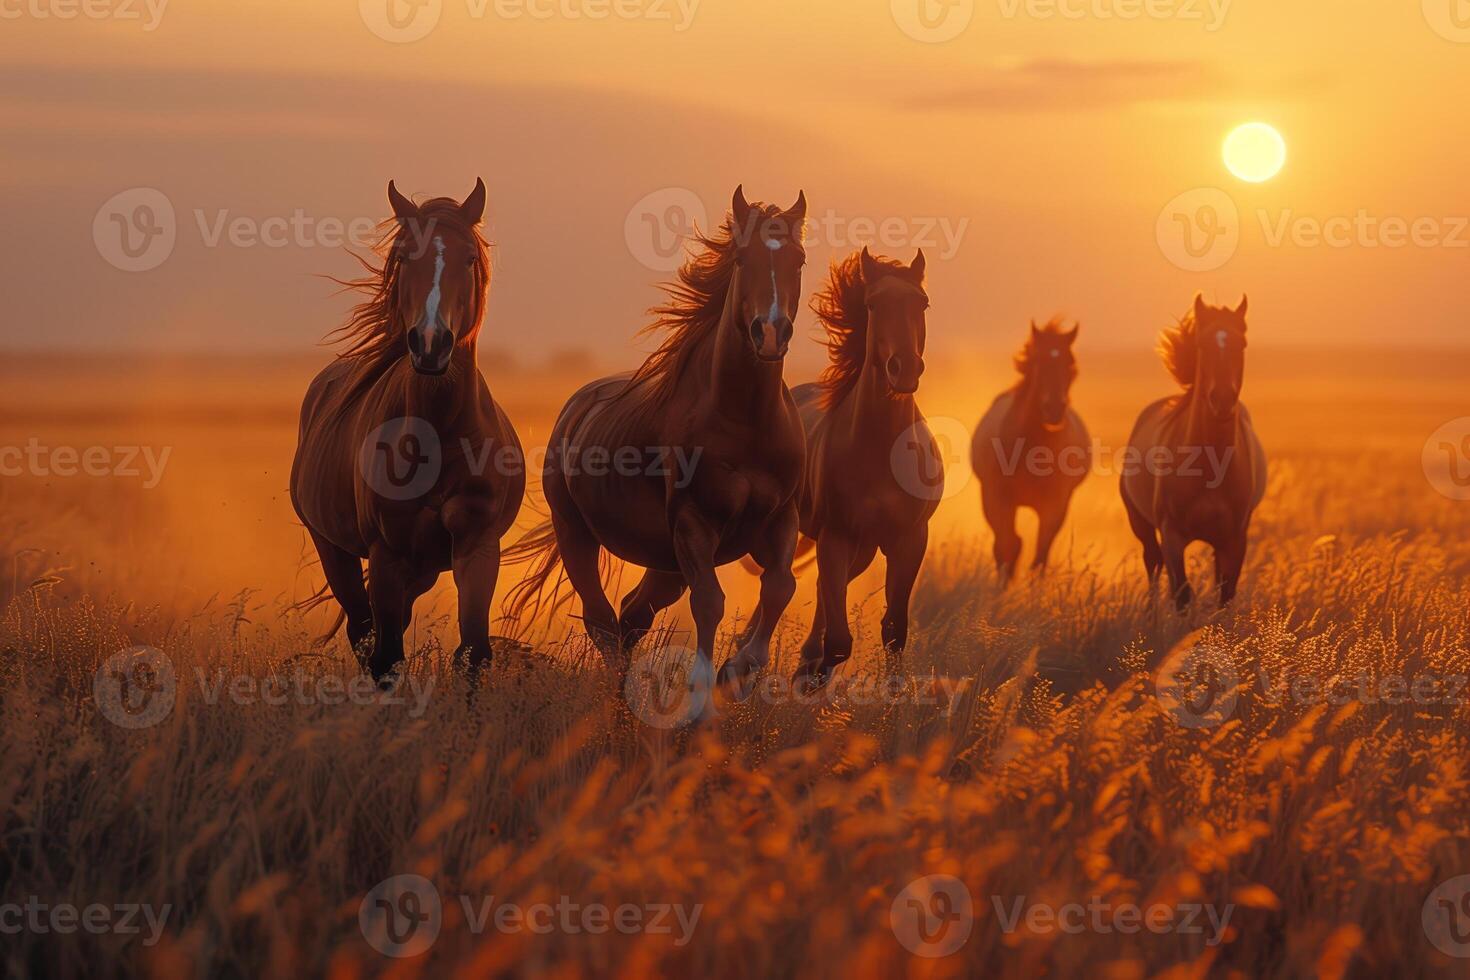 Herd of wild horses galloping in golden field at sunset, with dramatic lighting and dust photo